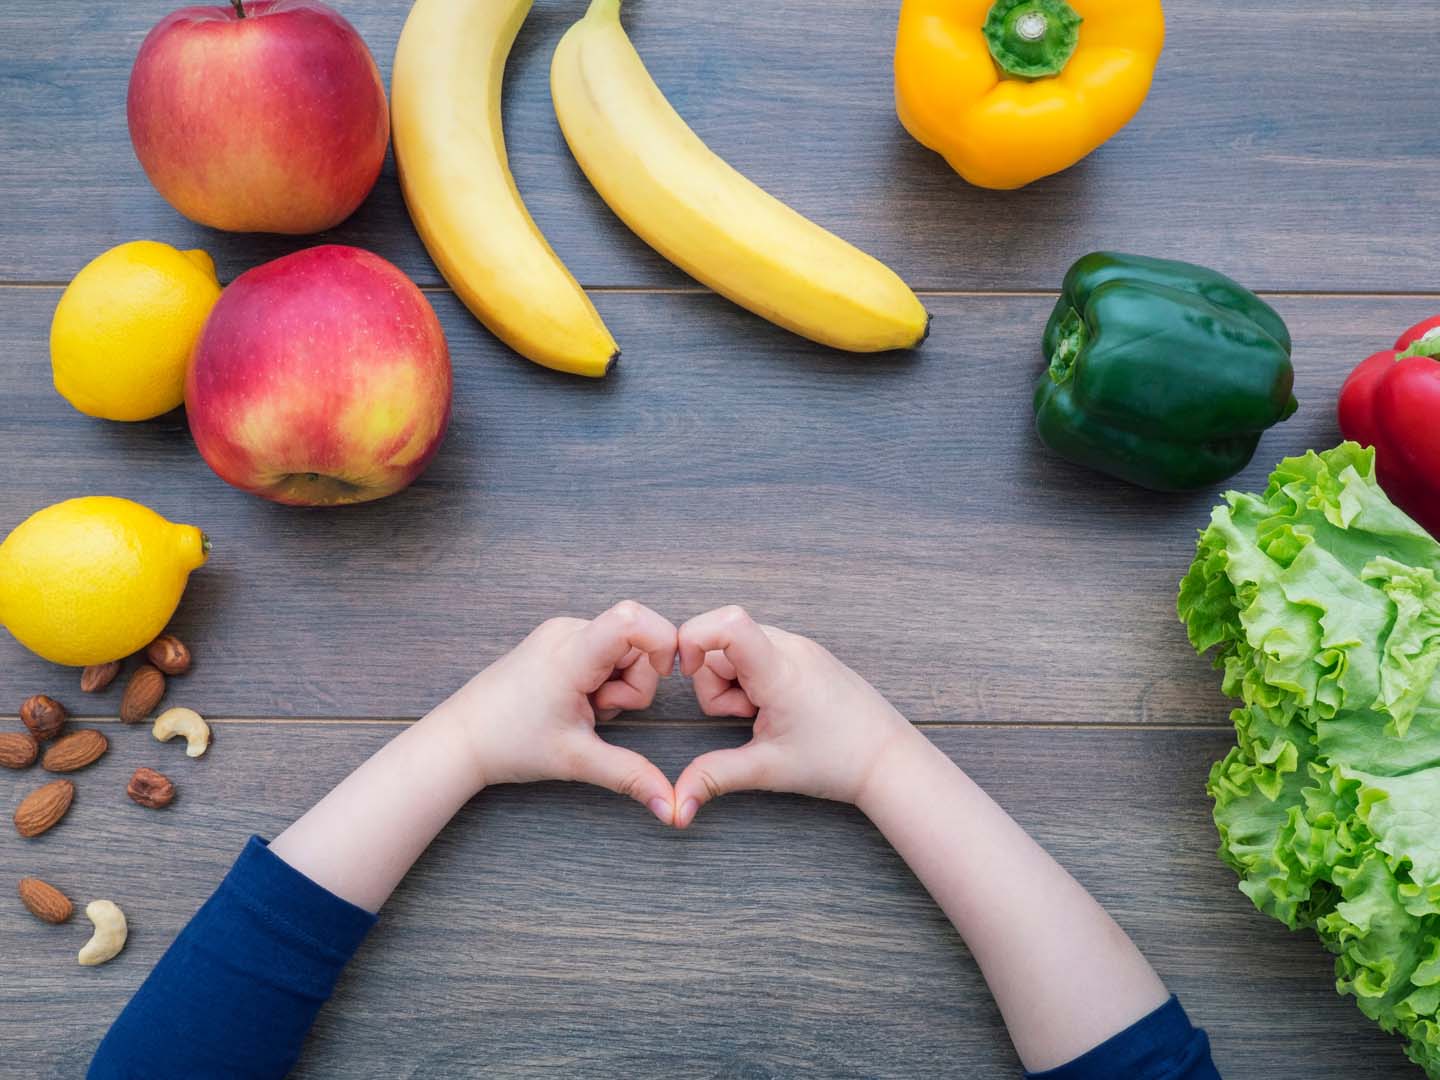 Kid,Making,Heart,Shape,With,Her,Hands,And,Healthy,Food